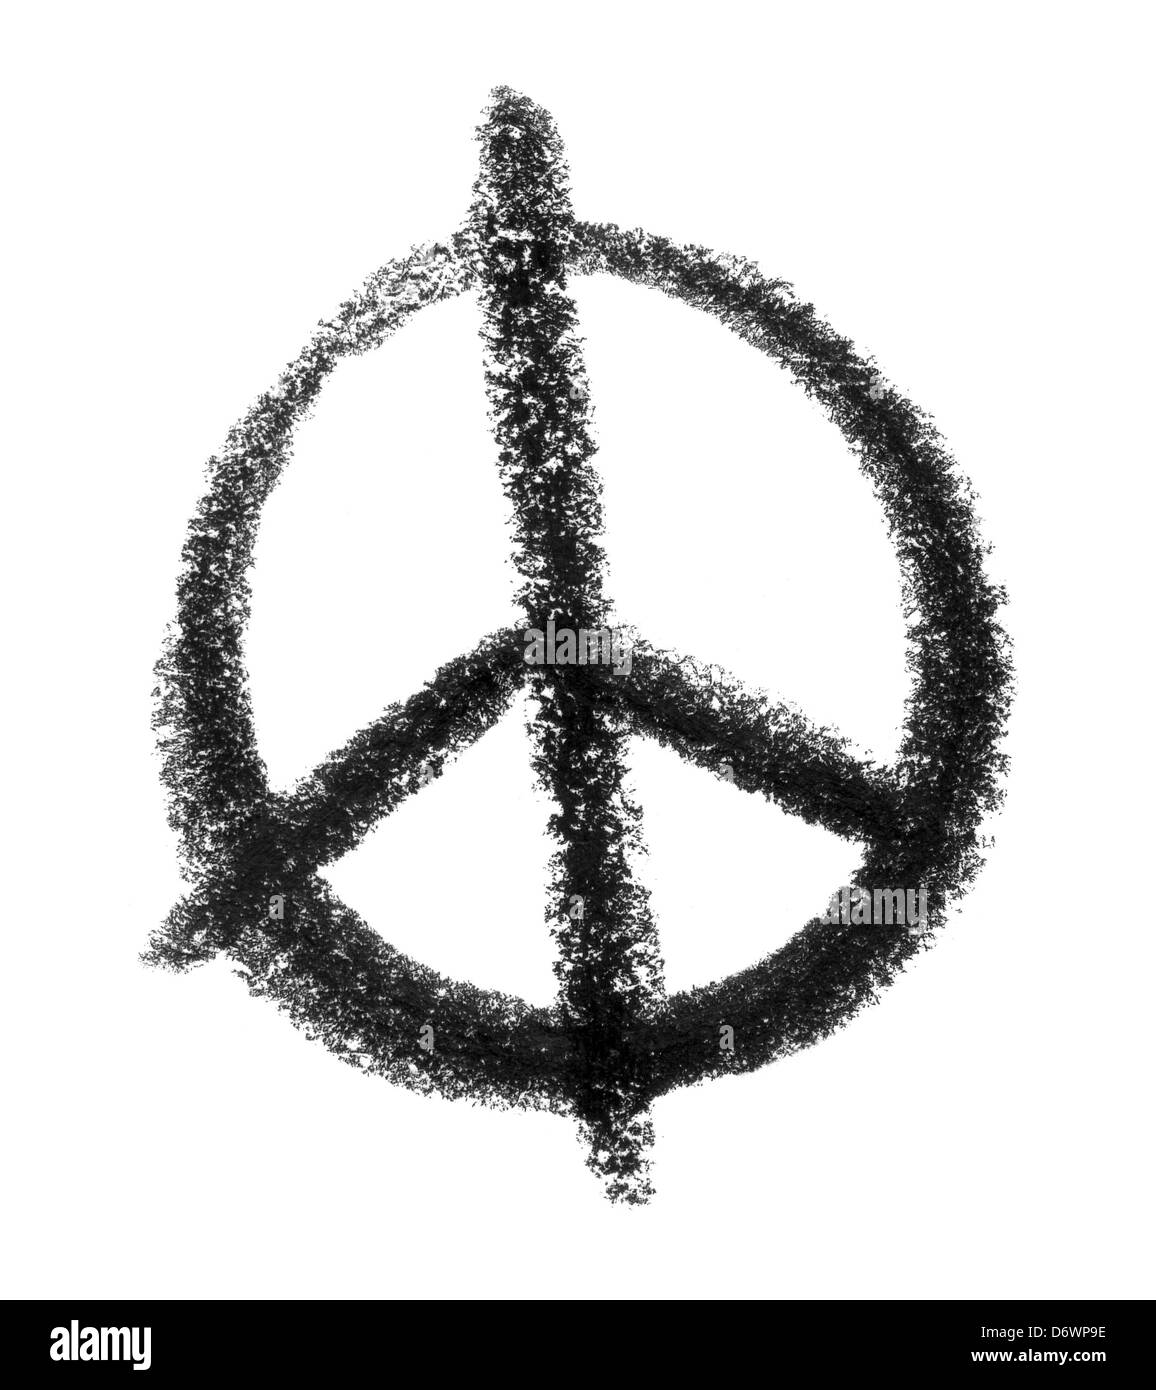 crayon-sketched illustration of a peace sign Stock Photo